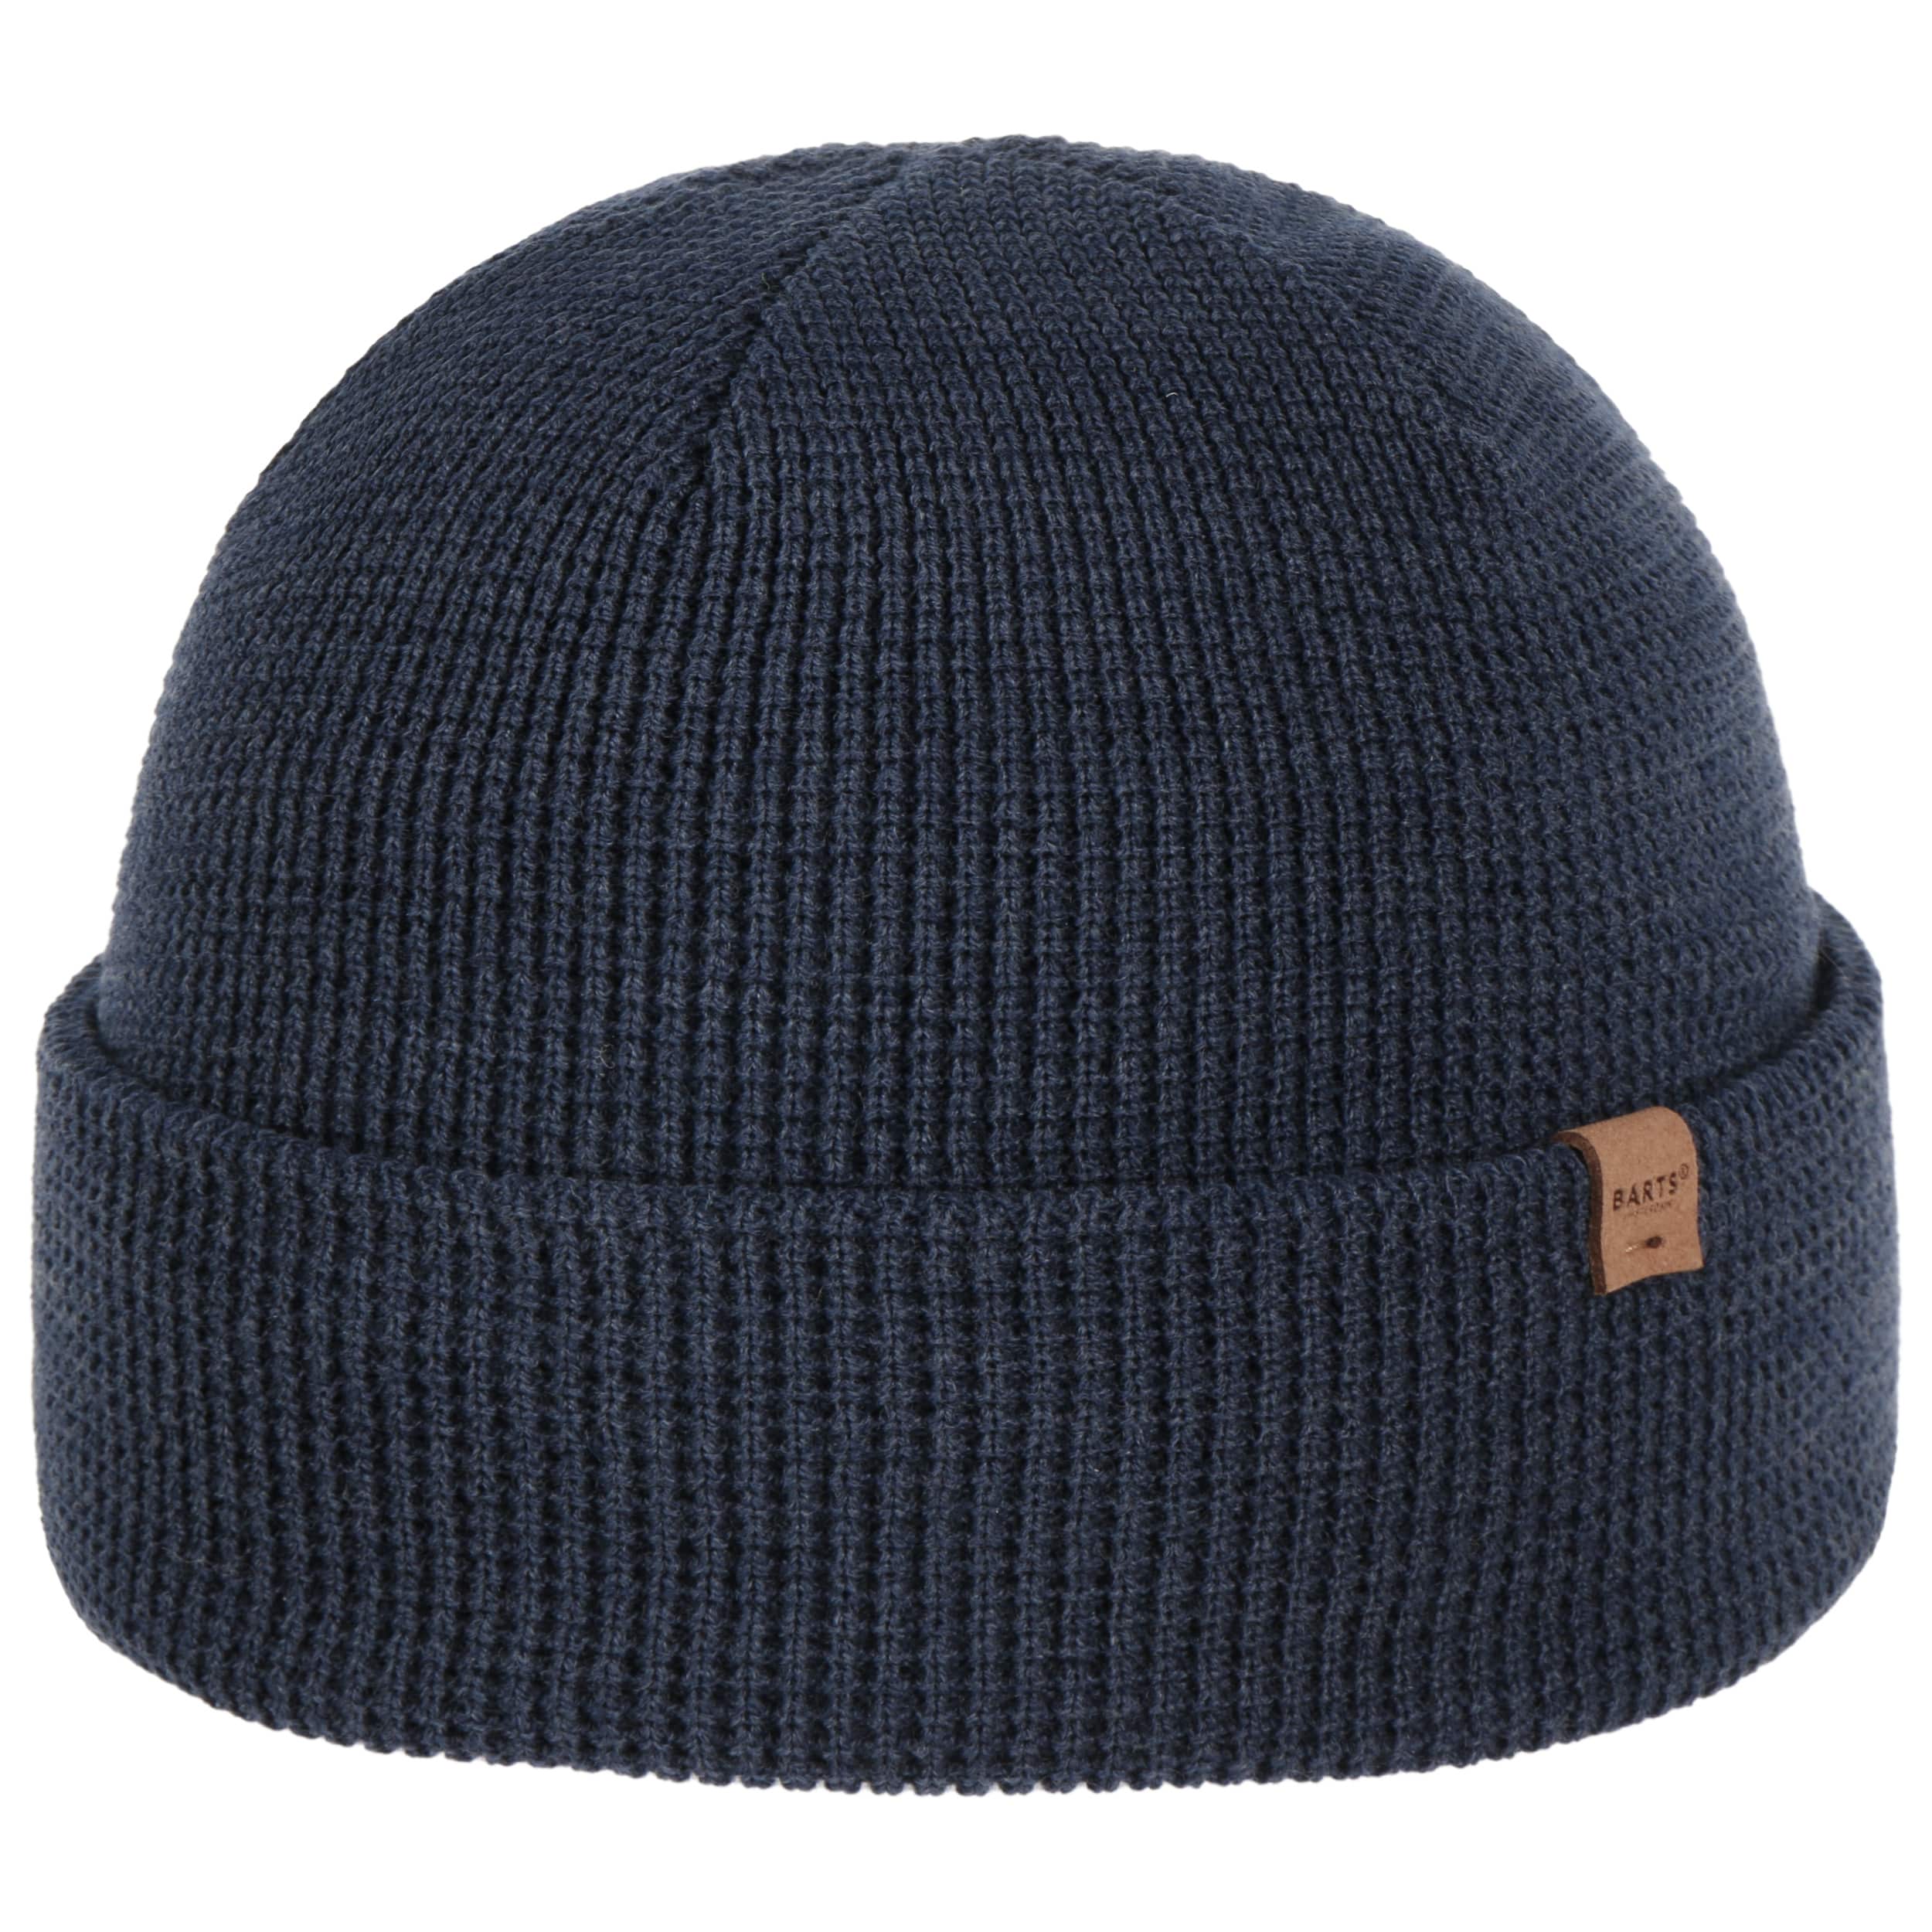 Coler Beanie Hat by Barts - € 26,95